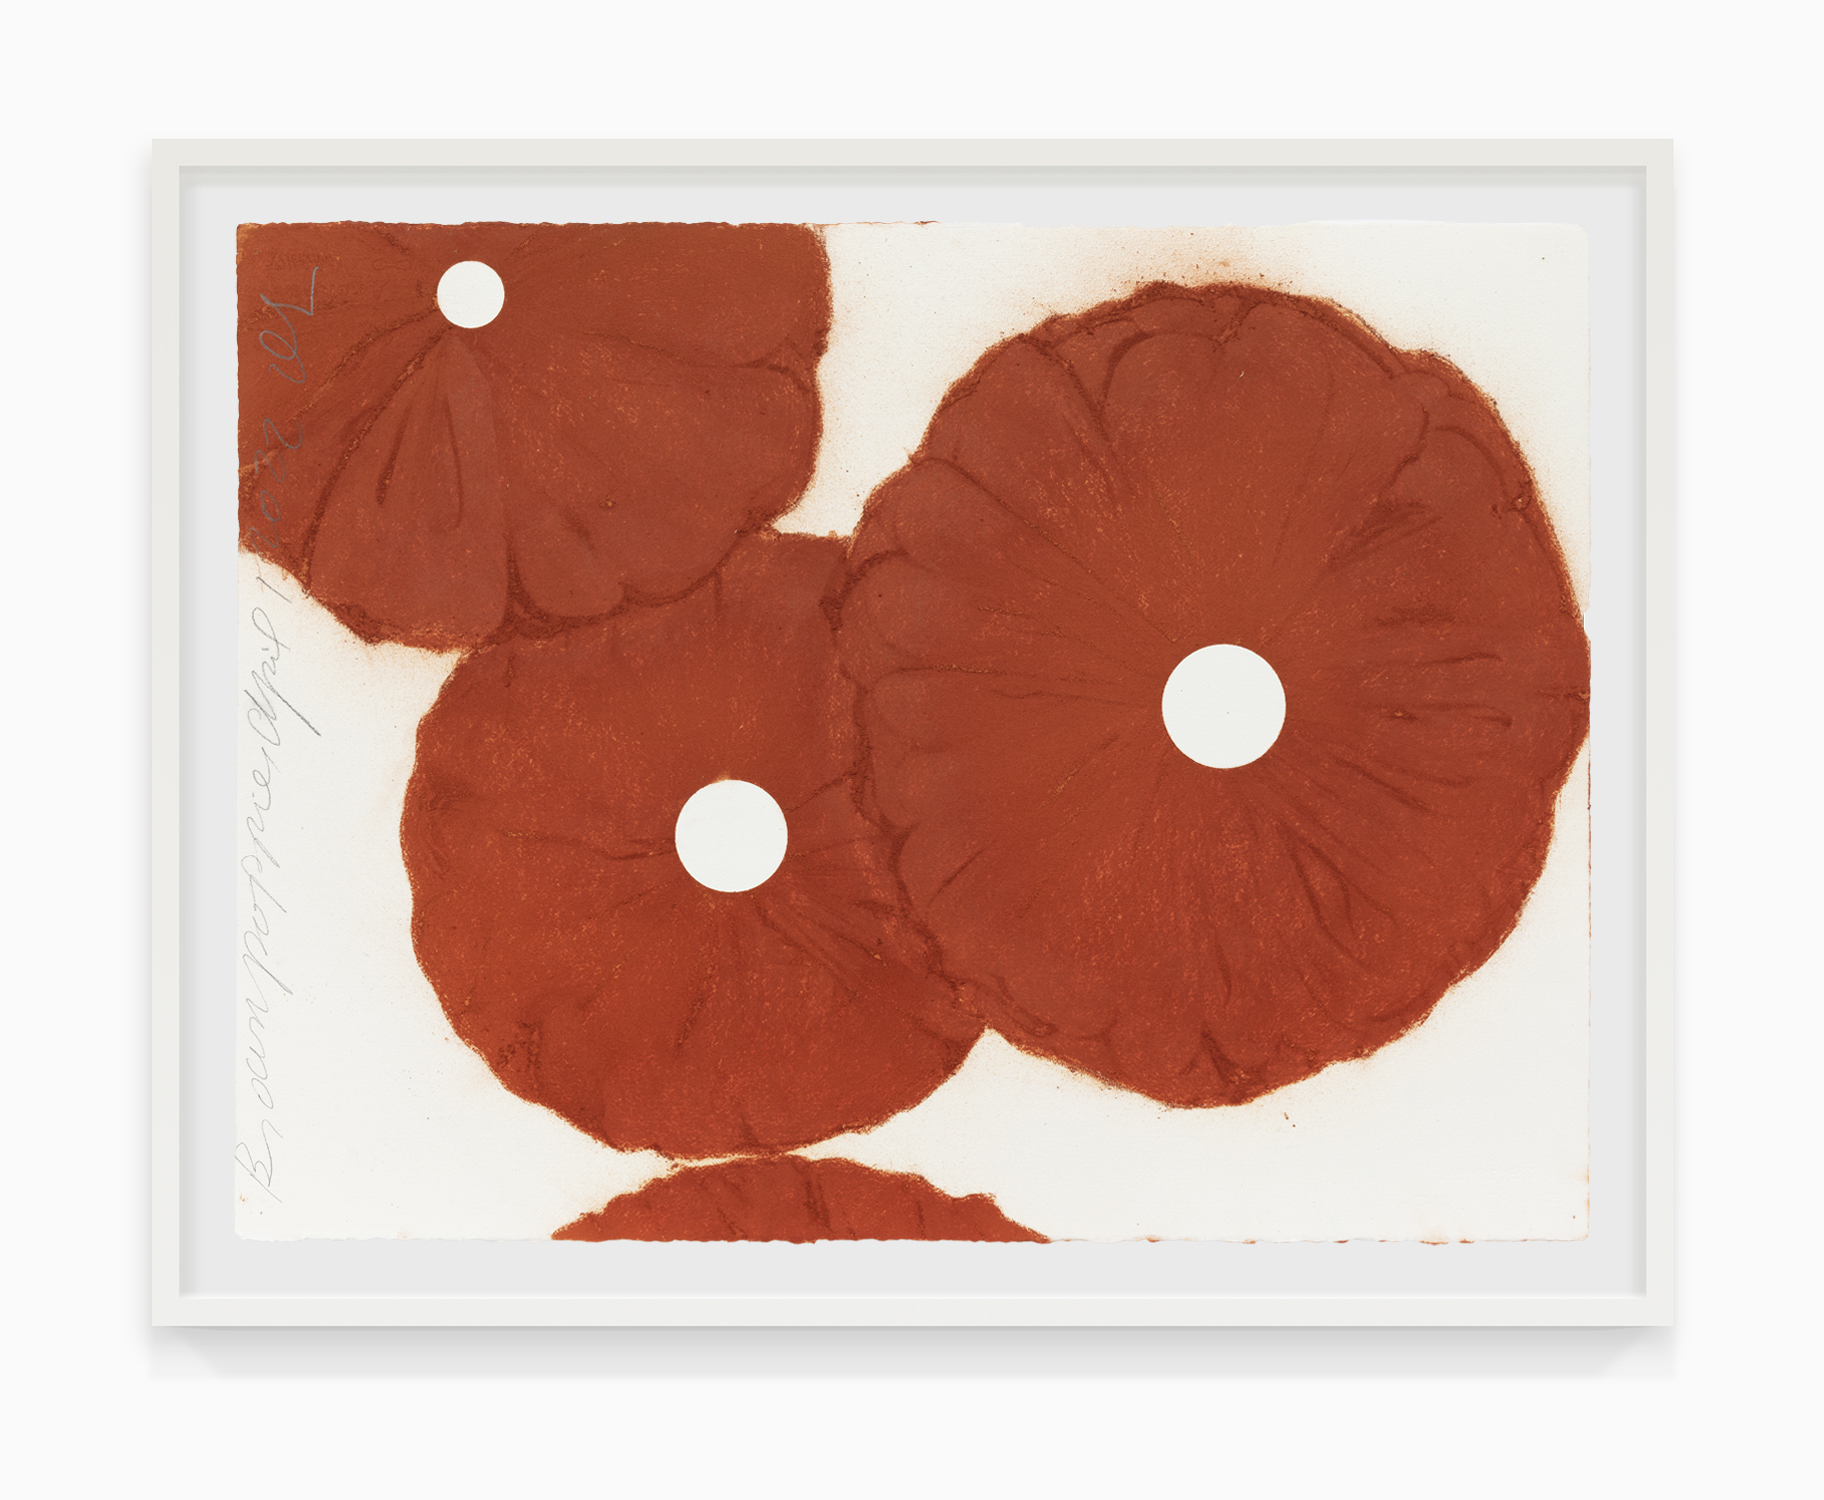 Donald Sultan Brown Poppies, April 1 2022, 2022 Conte on paper Paper Dimensions: 22 1/2 x 30 inches (57.2 x 76.2 cm) Framed Dimensions: 26 x 33 1/2 x 1 3/4 inches (66 x 85.1 x 4.4 cm)